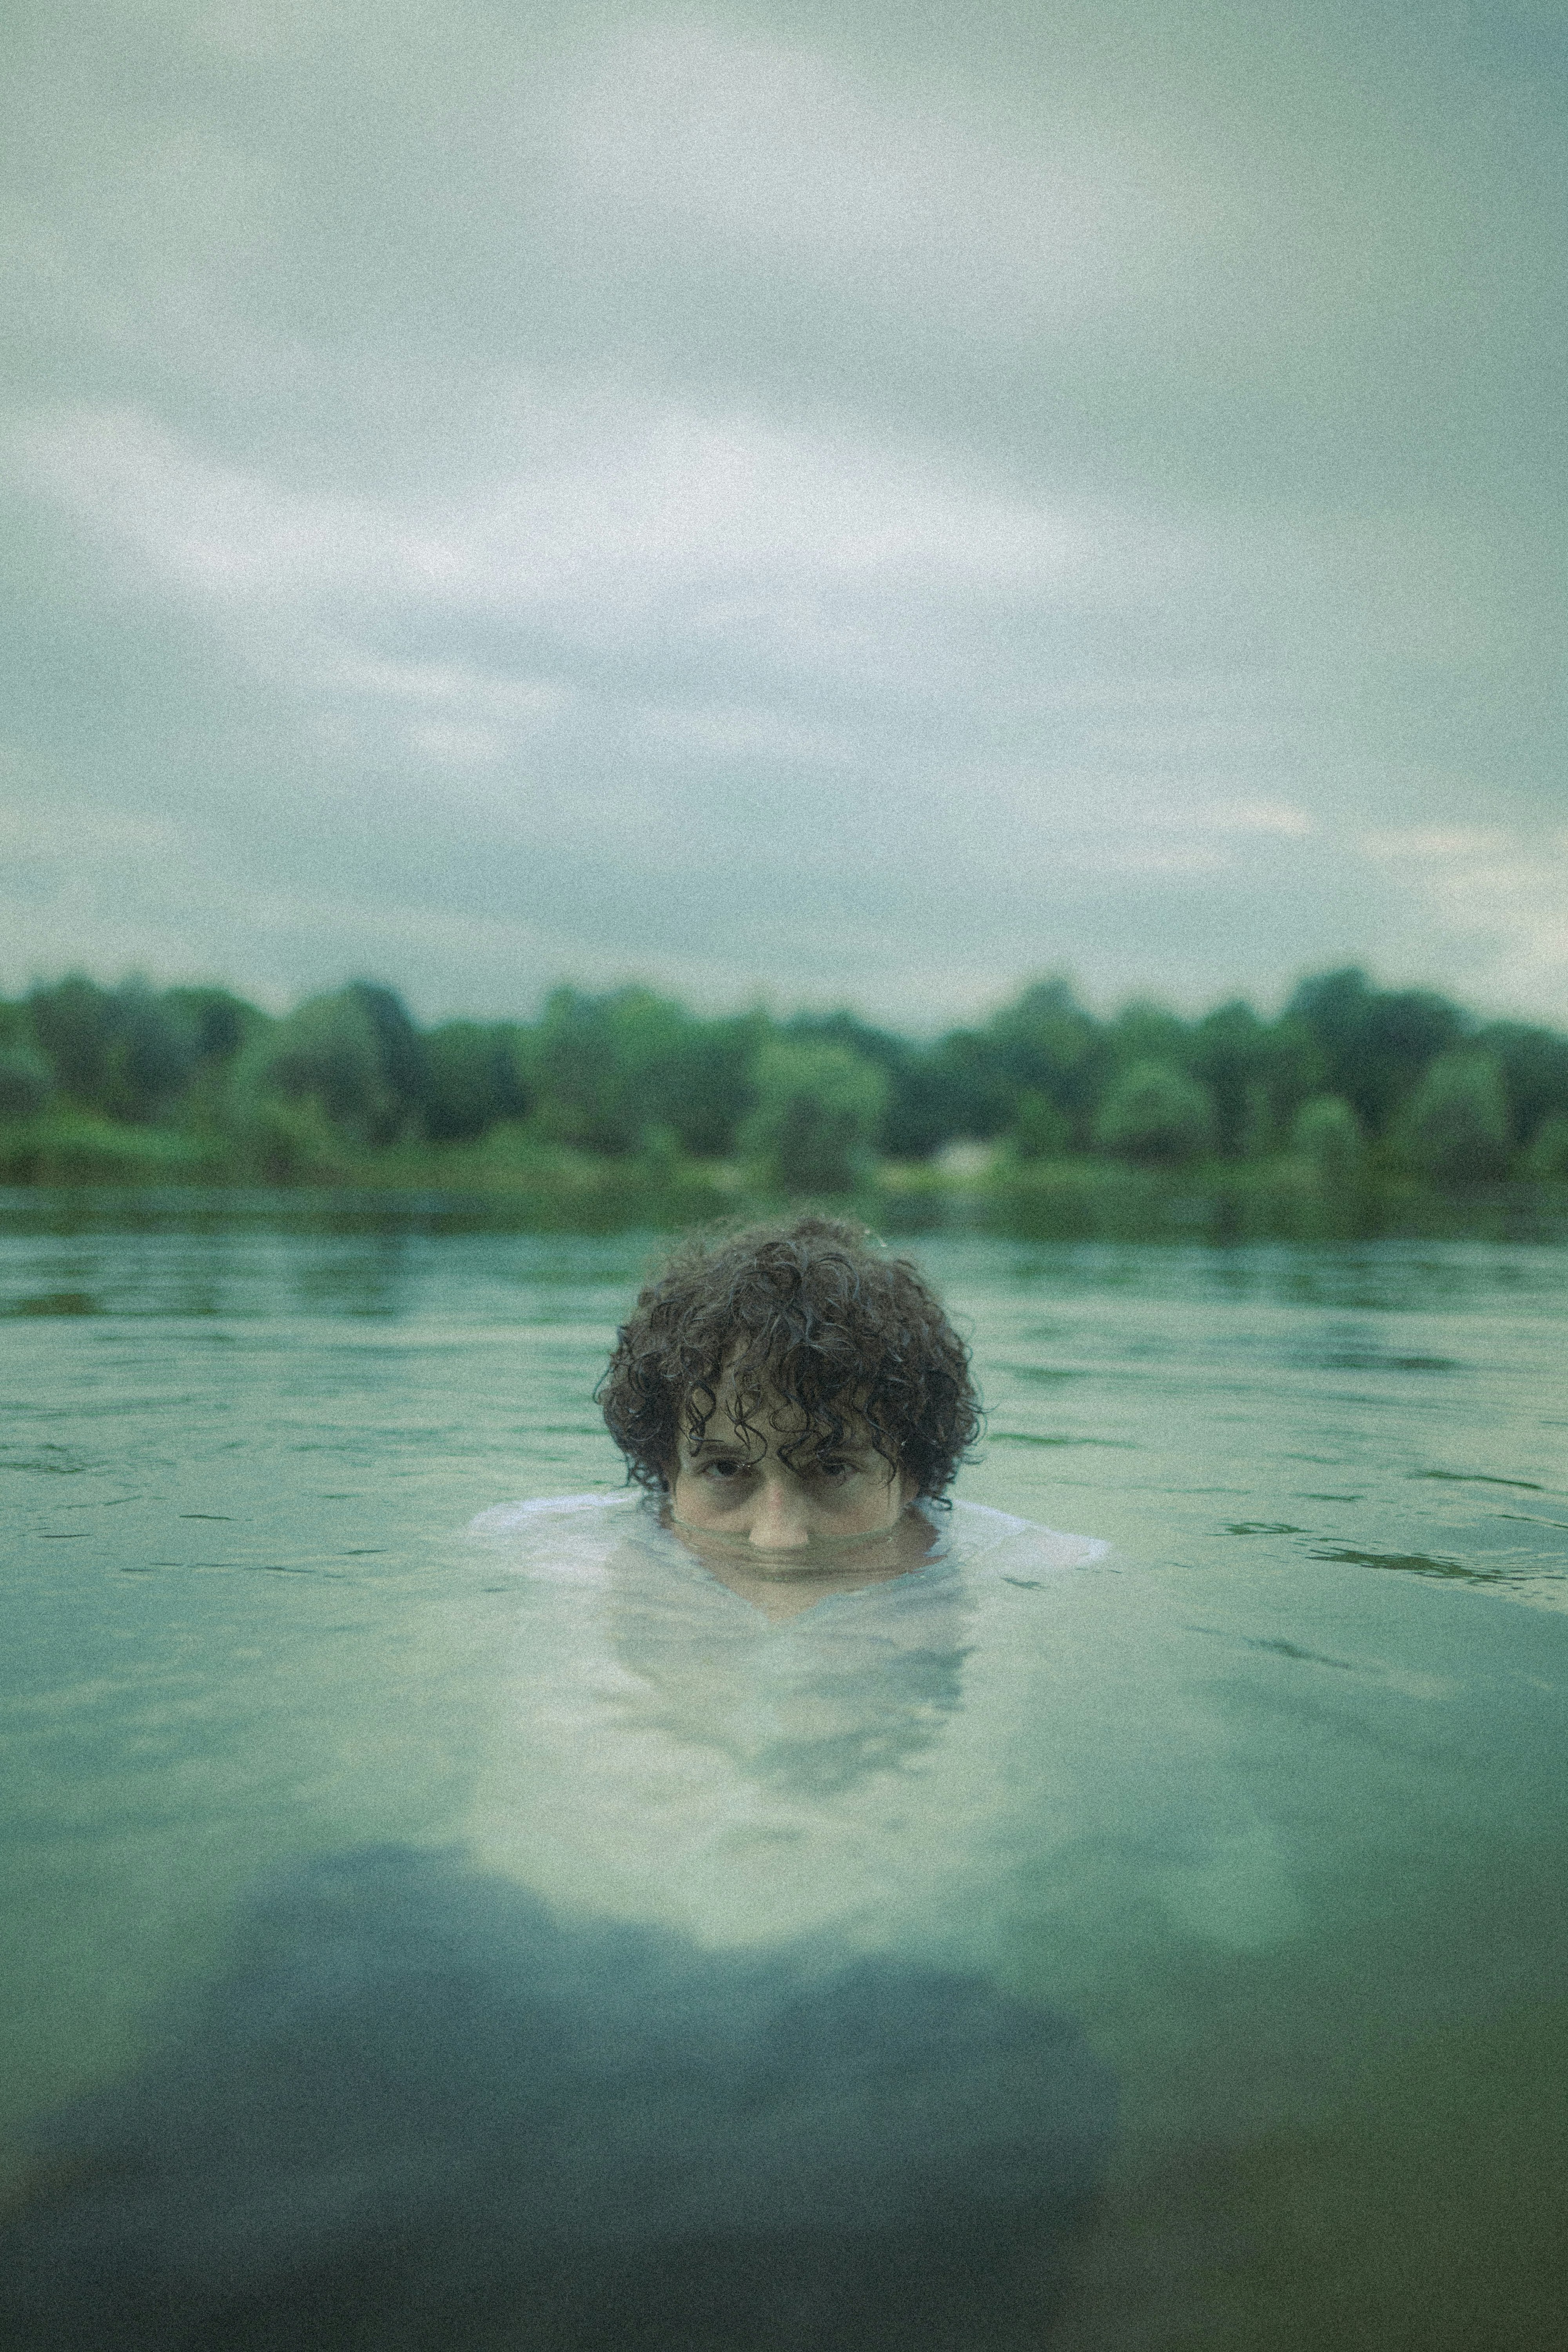 boy in water under cloudy sky during daytime